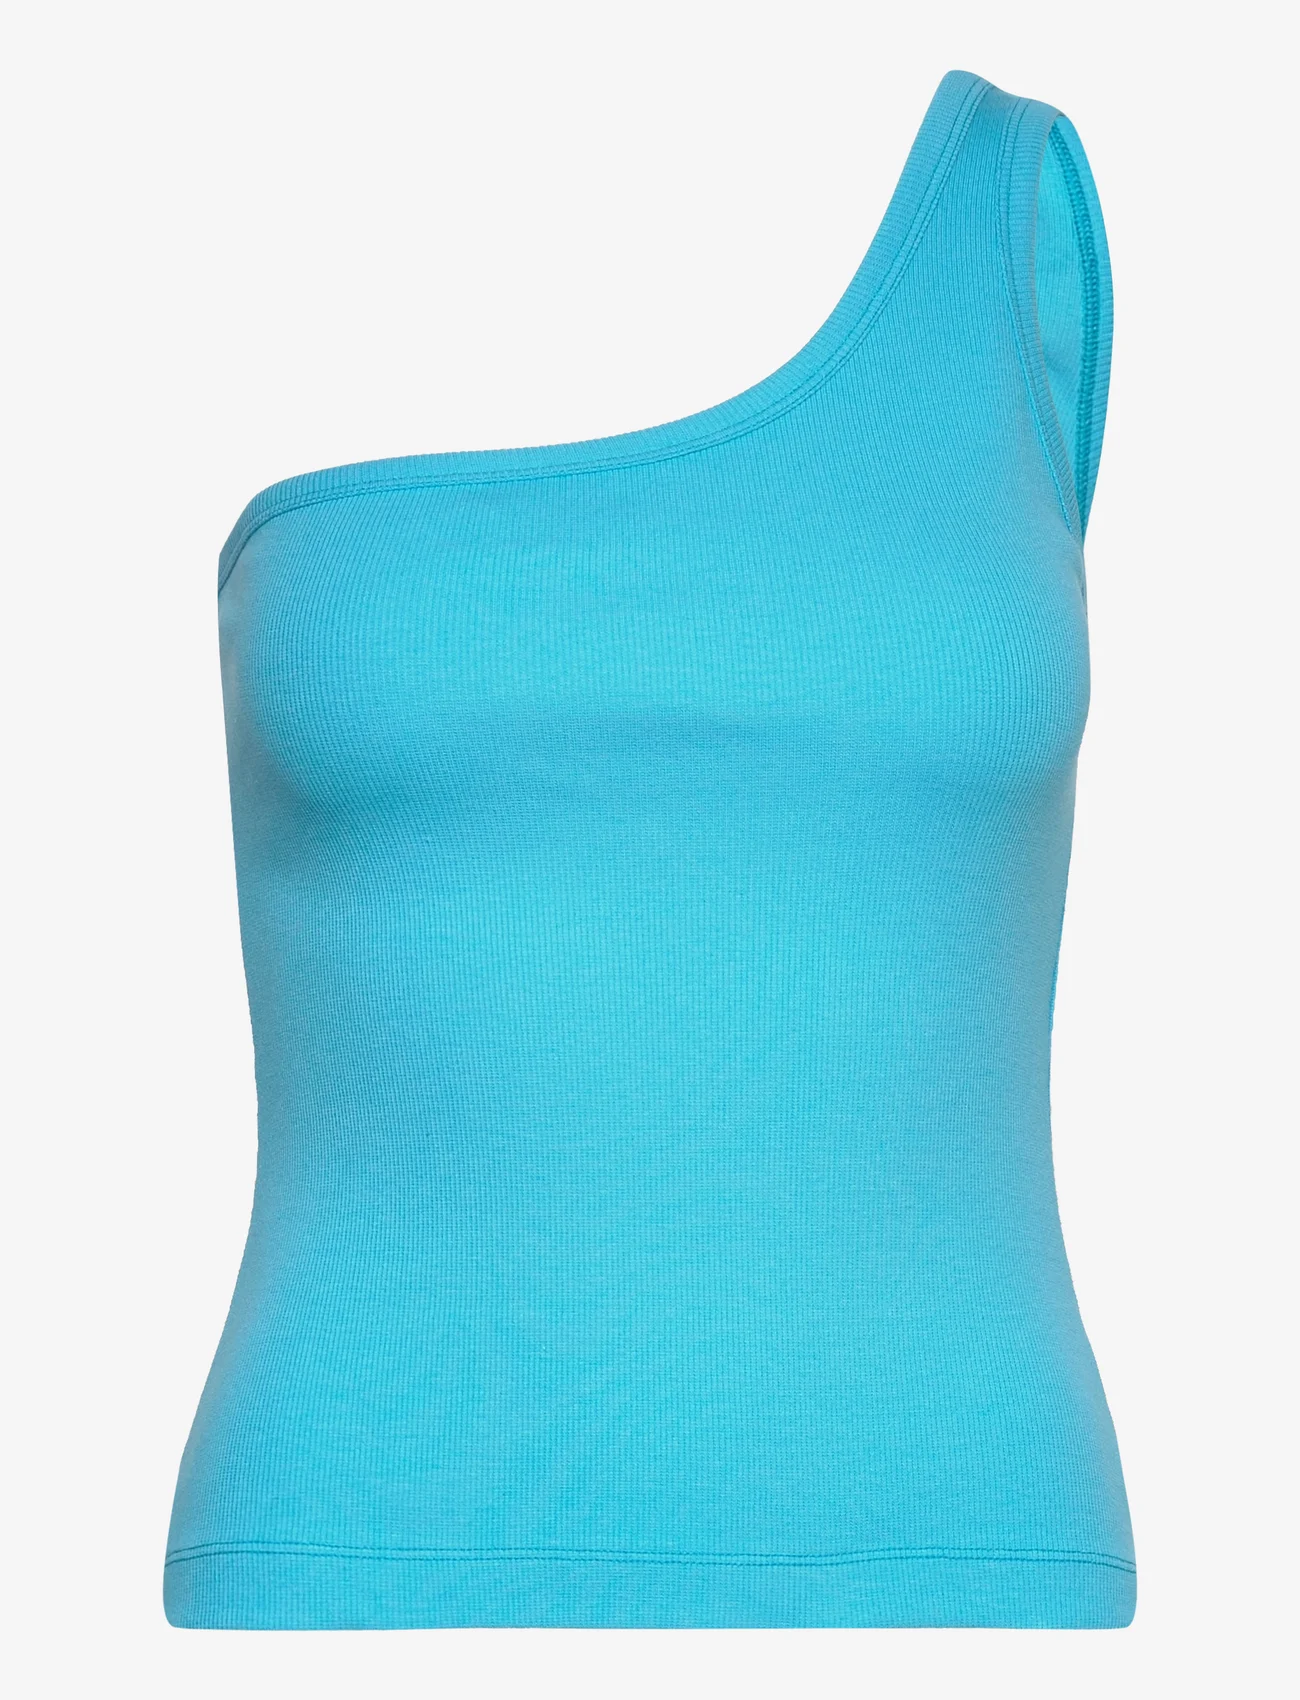 RODEBJER - Rodebjer Luna - mouwloze tops - tropic blue - 0